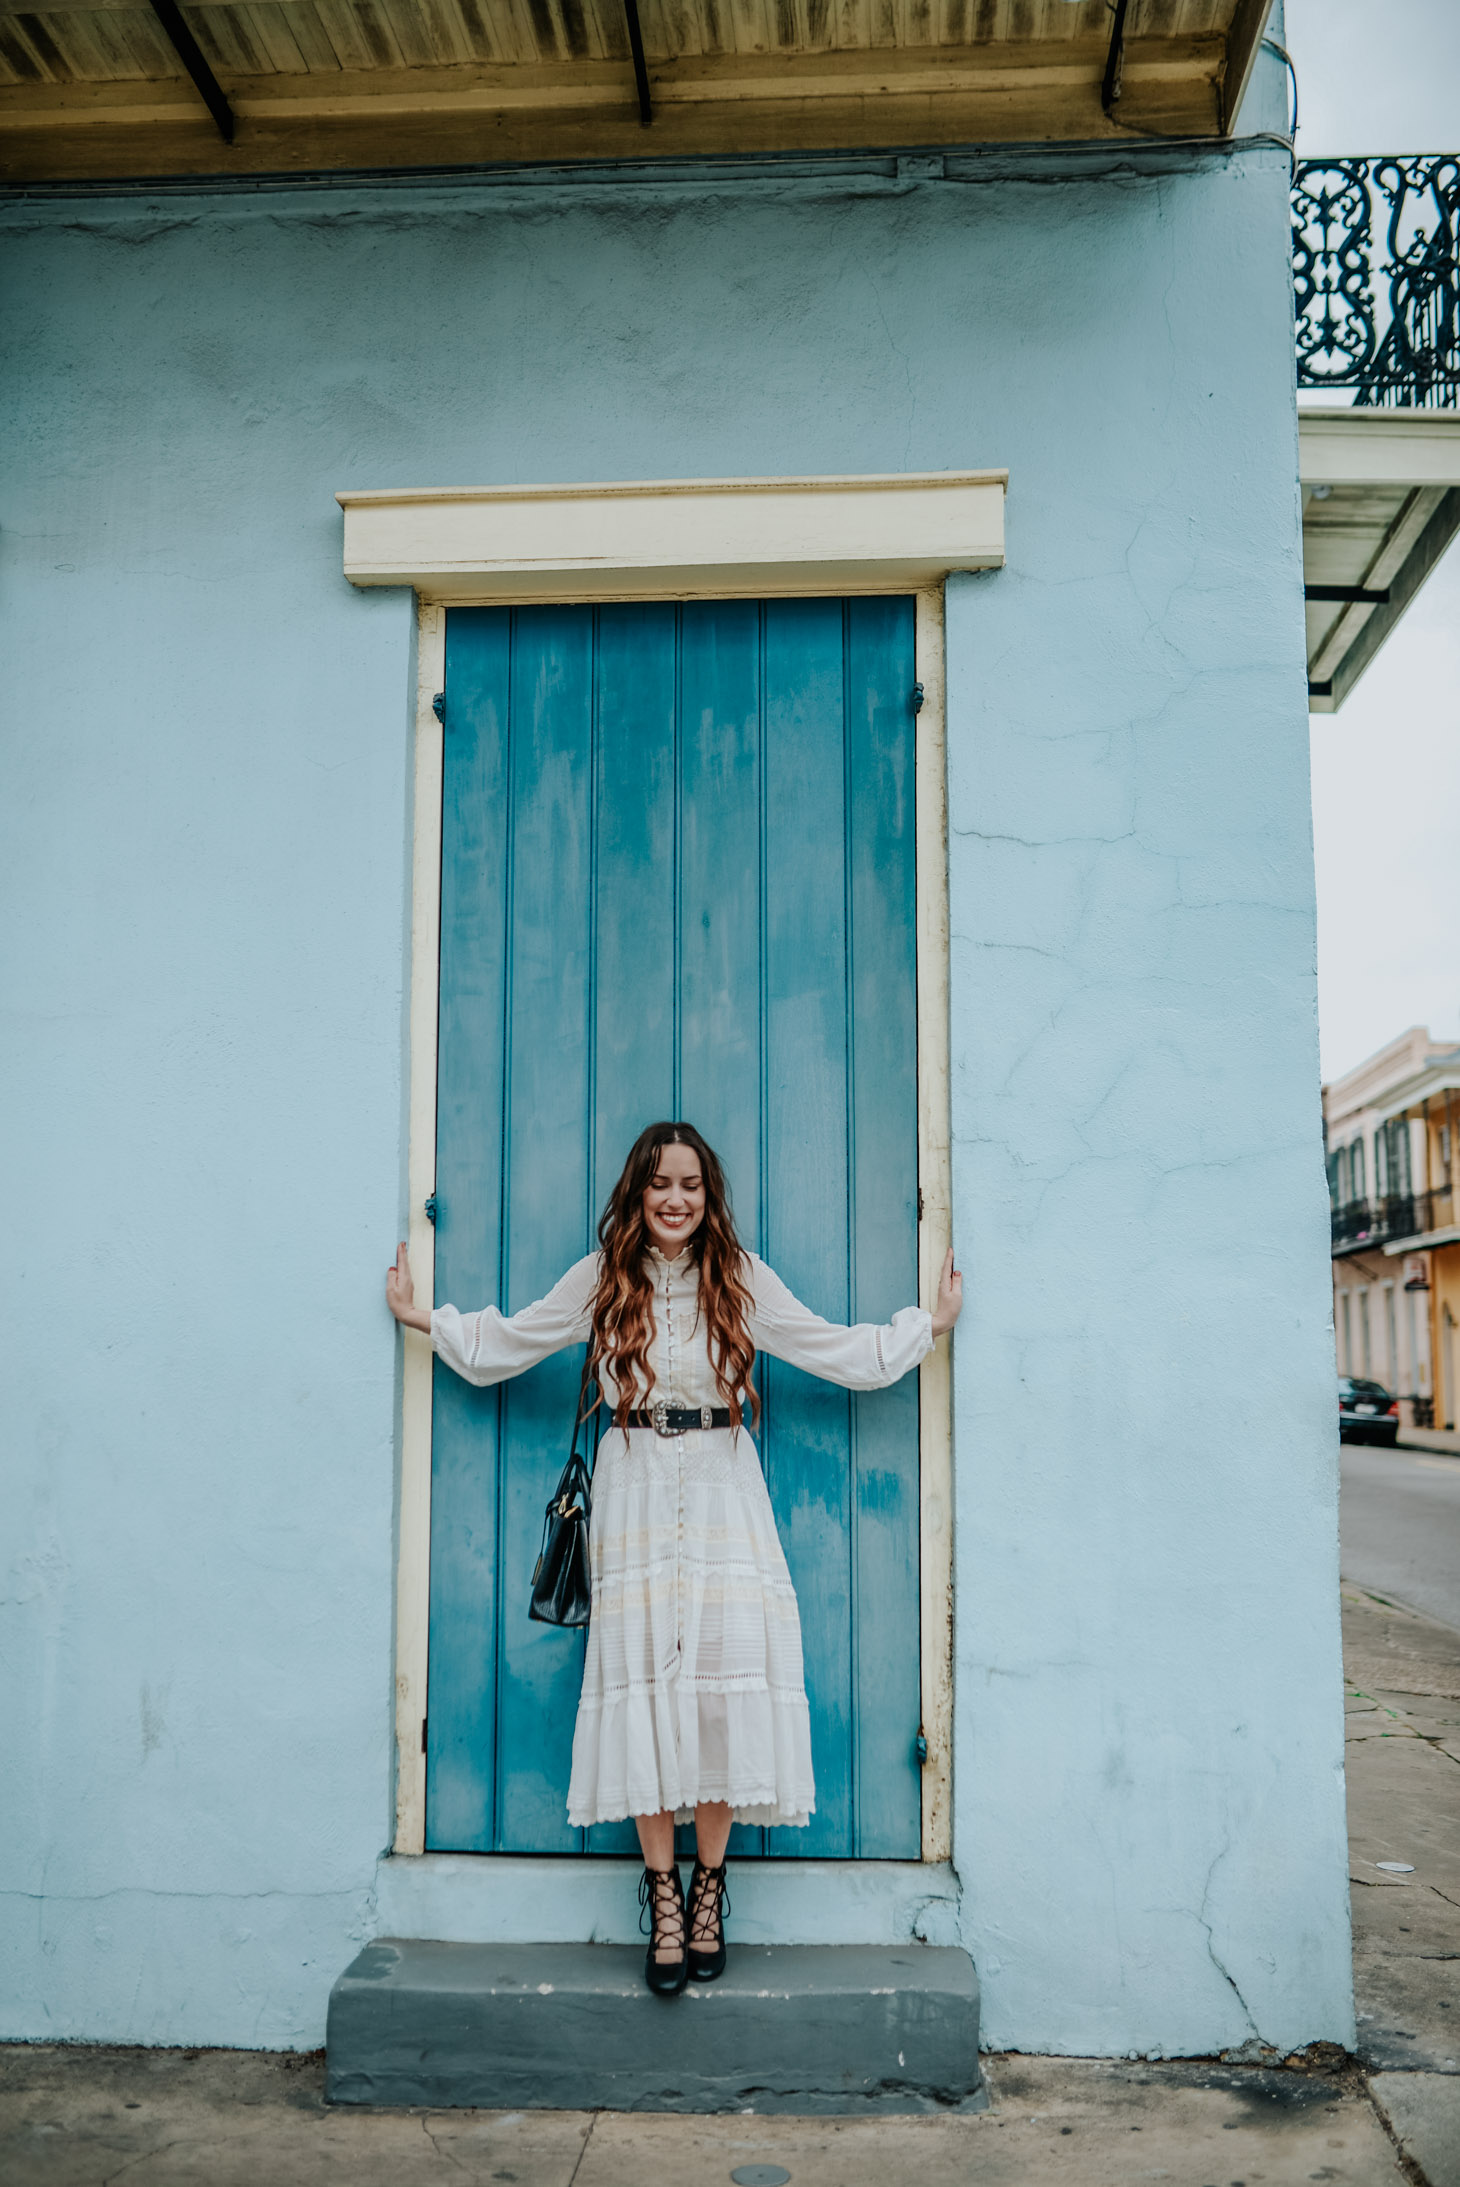 The perfect Boho White Dress for Spring styled by top US fashion blog, Lone Star Looking Glass: image of a woman wearing a Hanging Rock Gown boho white dress available at Shopbop, Free People studded belt, trench booties and an Anthropologie mini tote